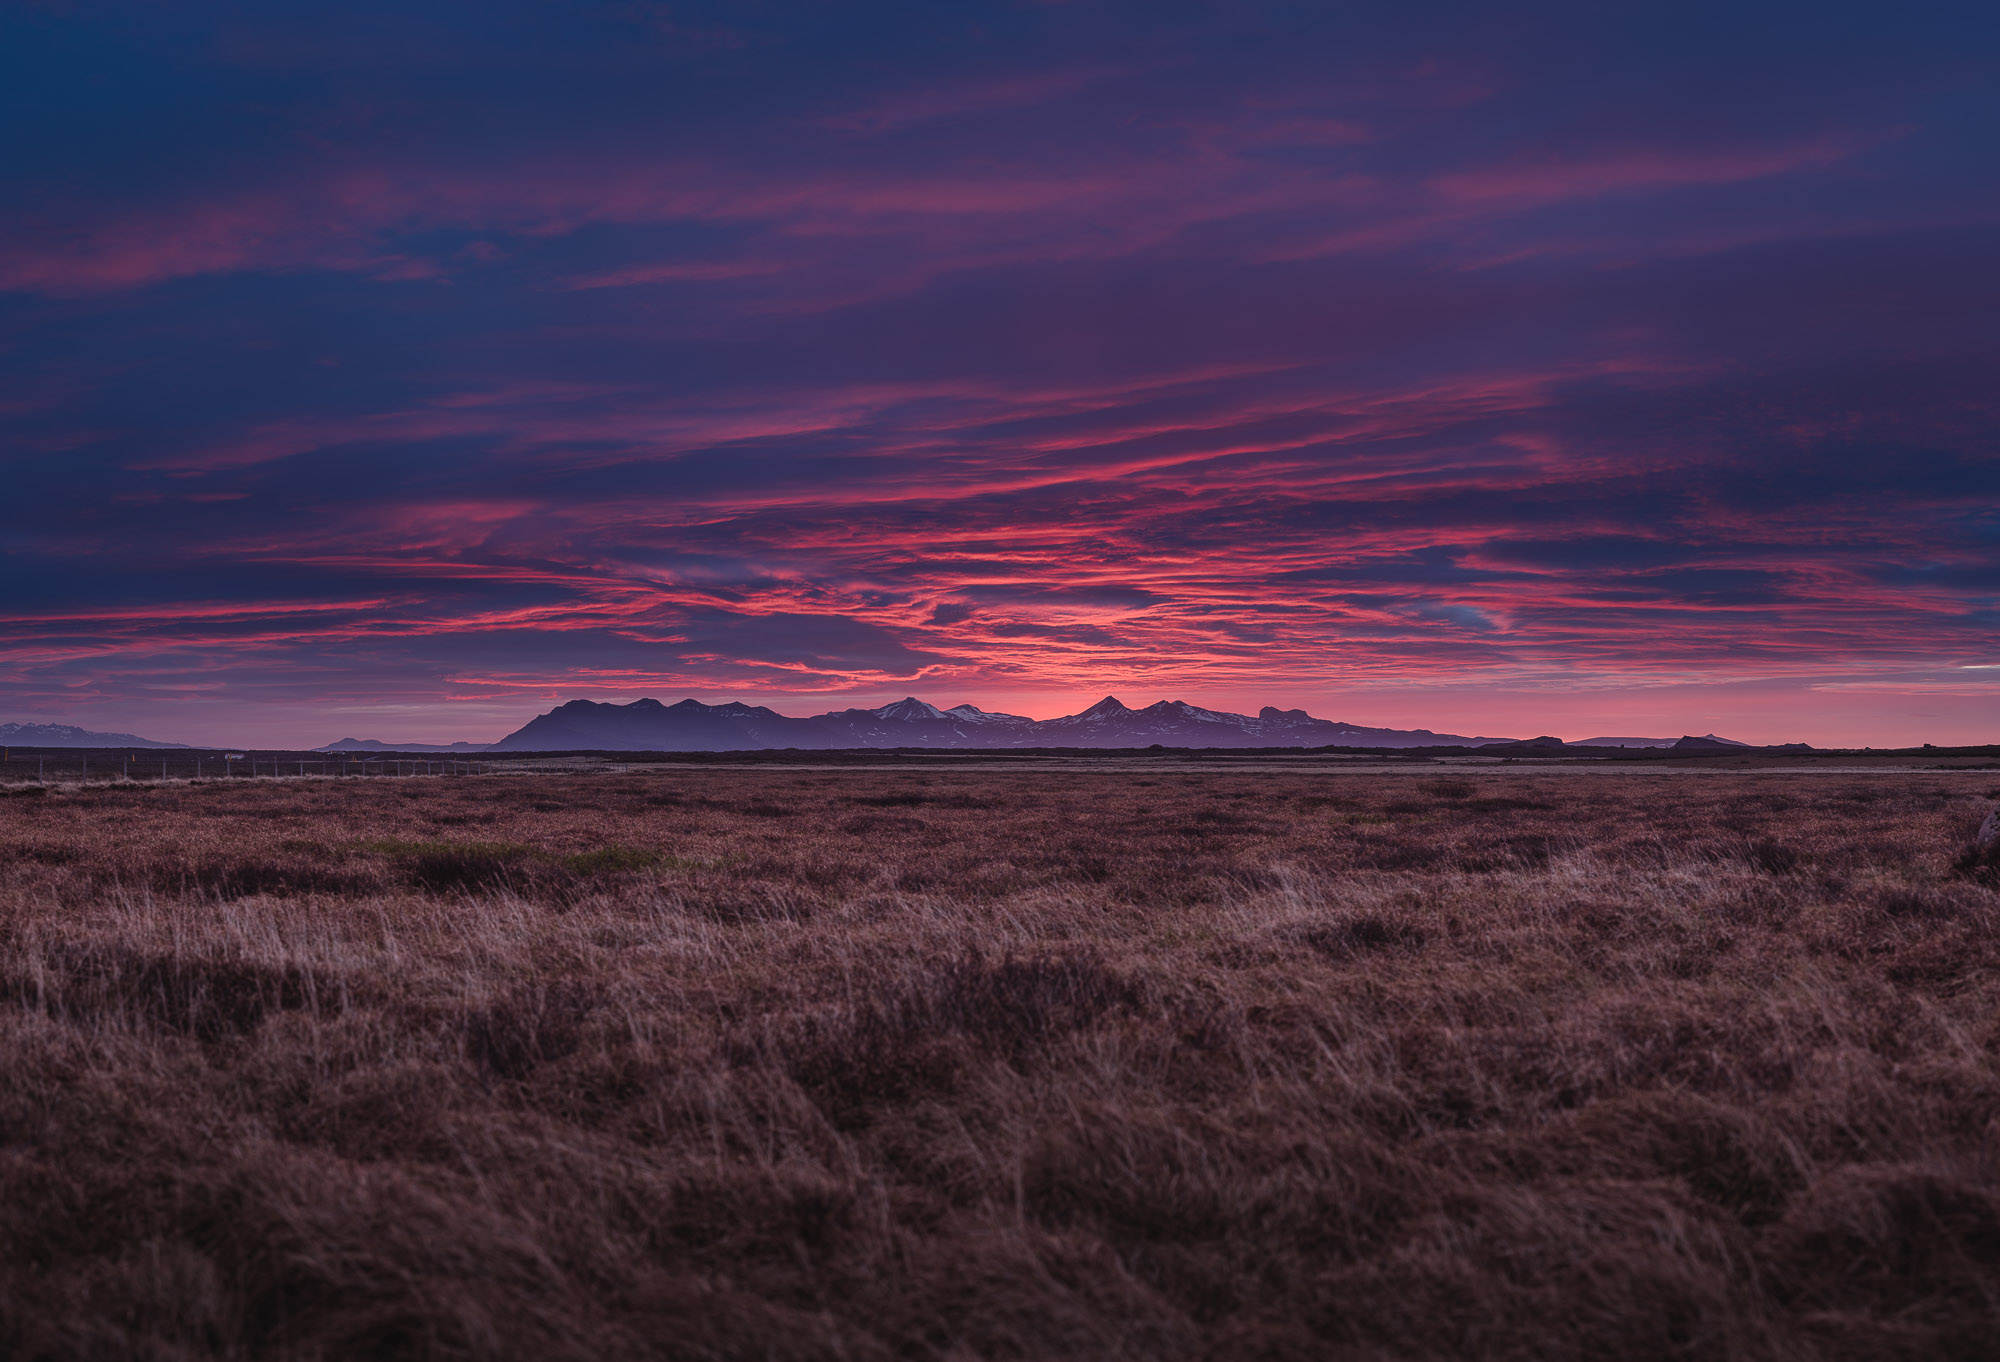 Looking towards Snæfellsnes, Iceland. 12 frame panorama, 70 megapixels, Sigma 105mm f/1.4 @ f/5.6, 1/1250th, ISO 100